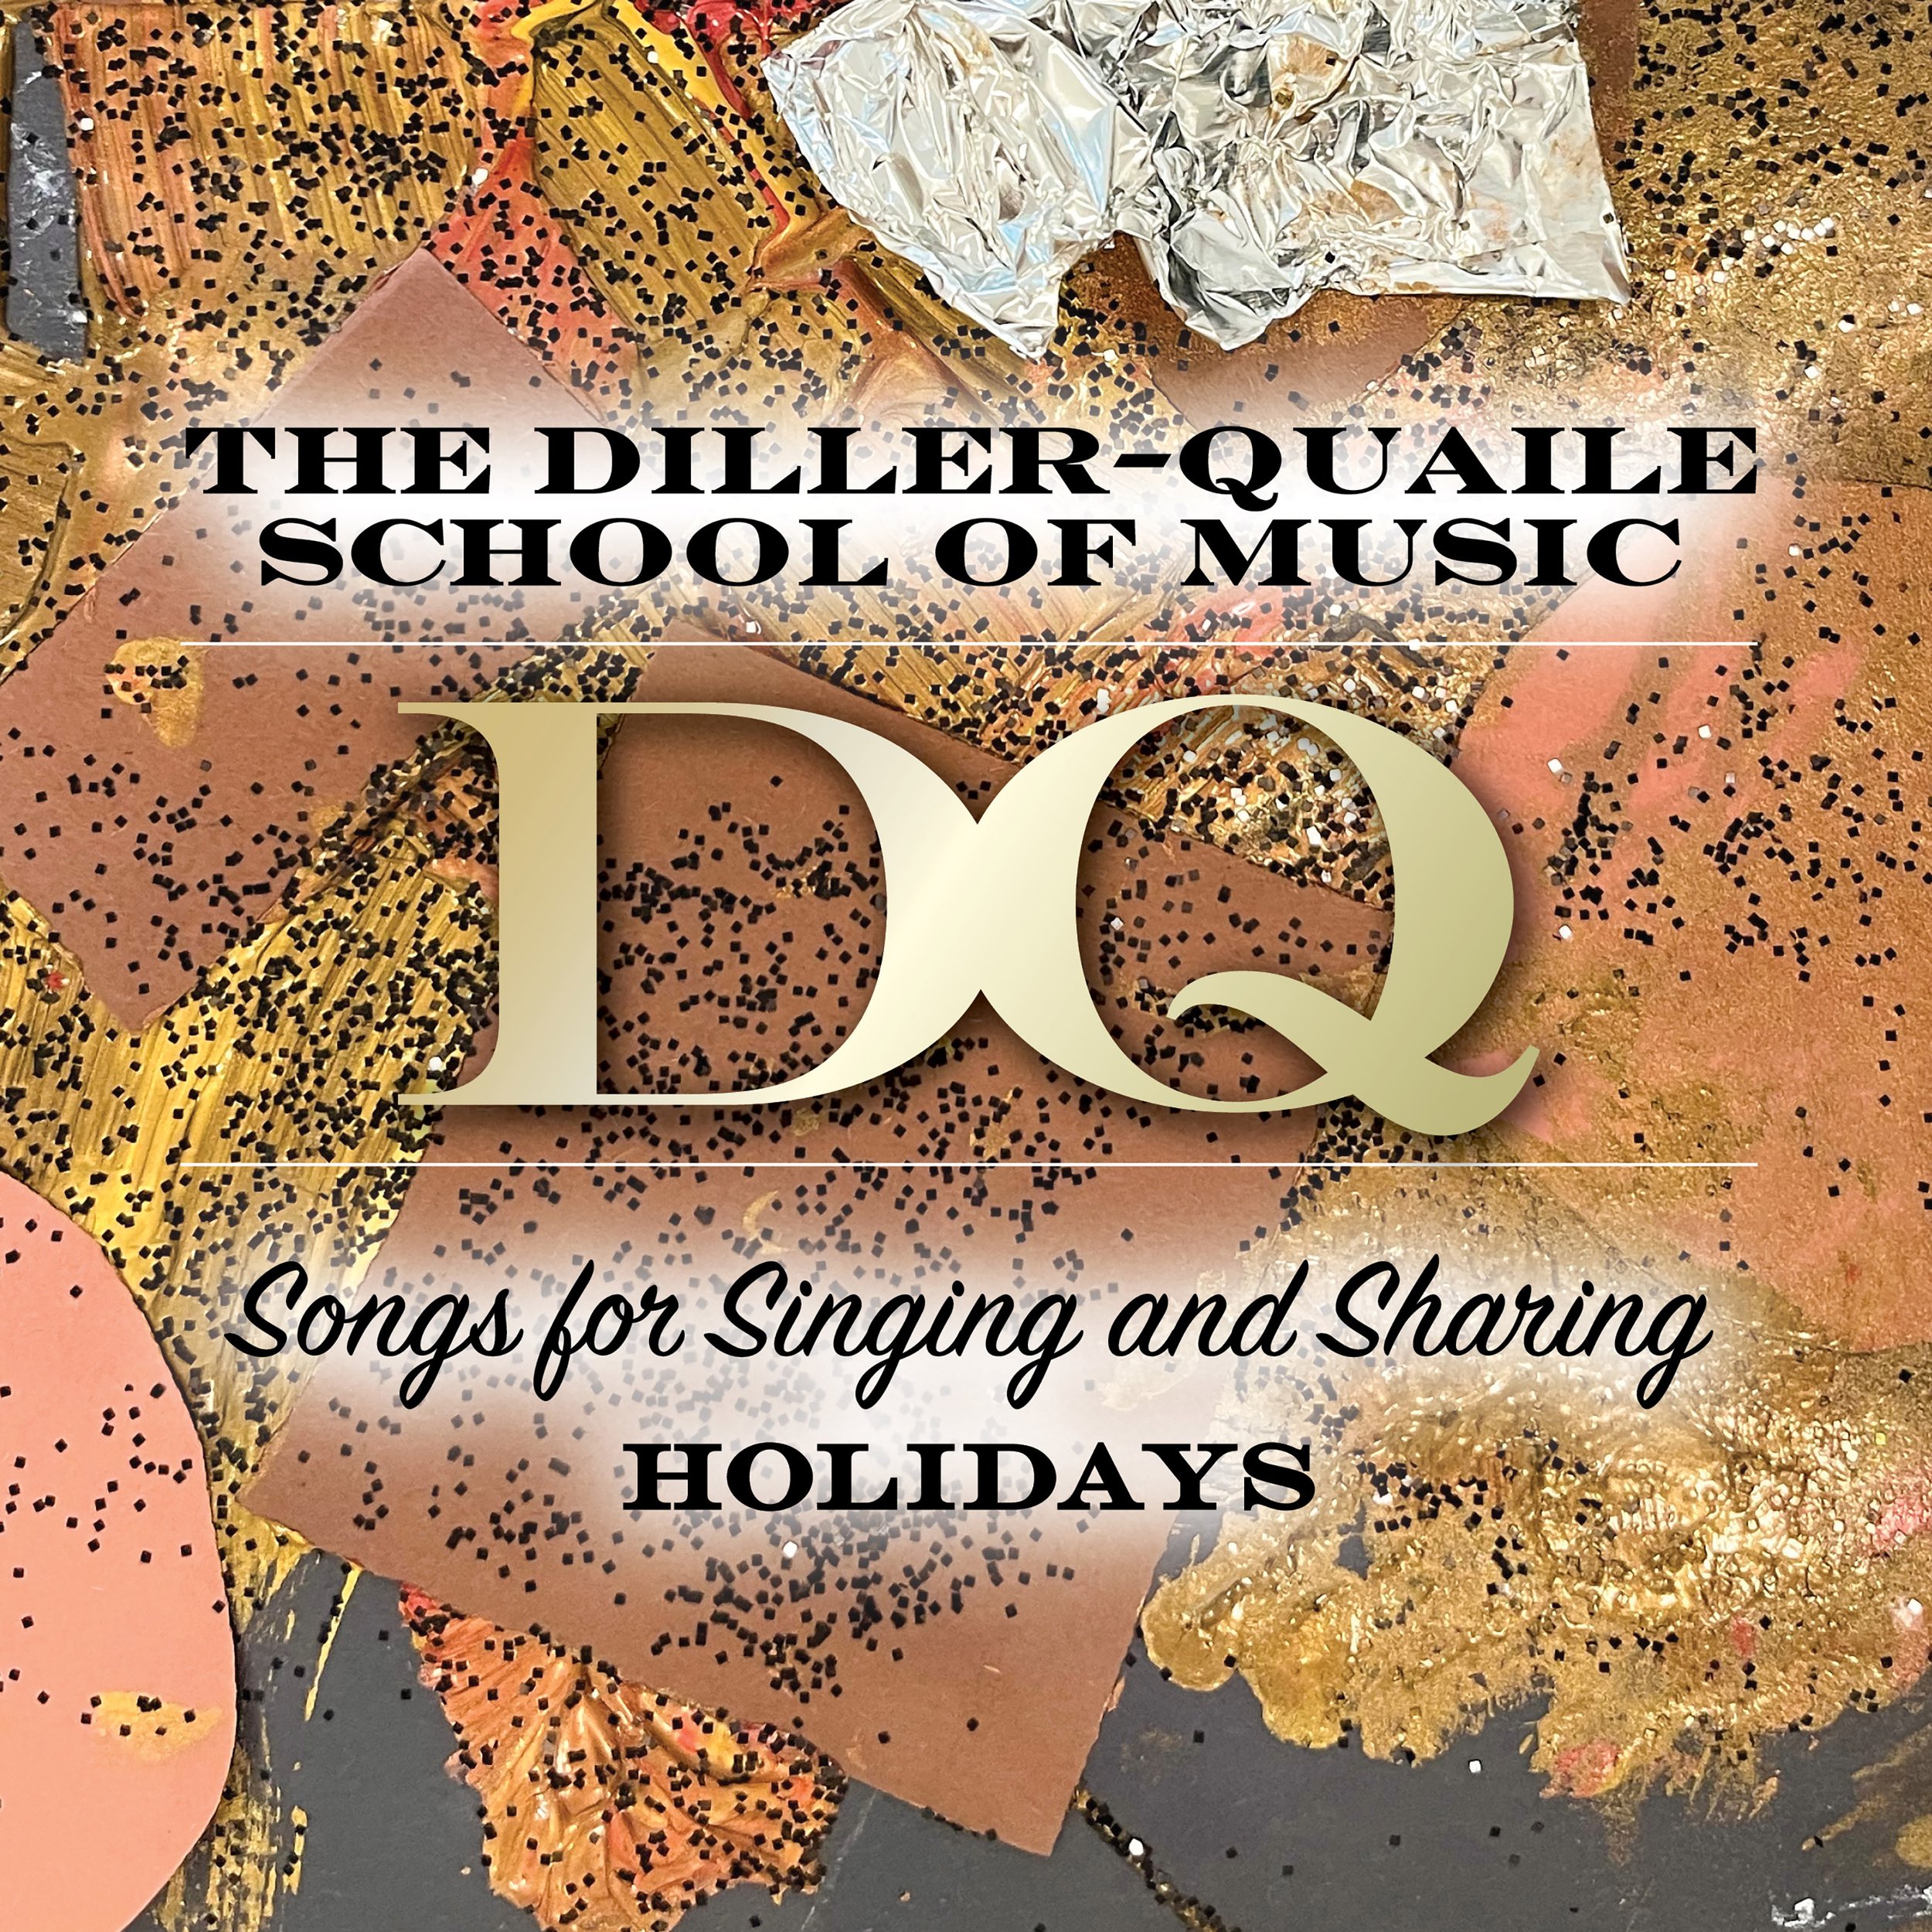 Songs for Singing and Sharing HOLIDAYS